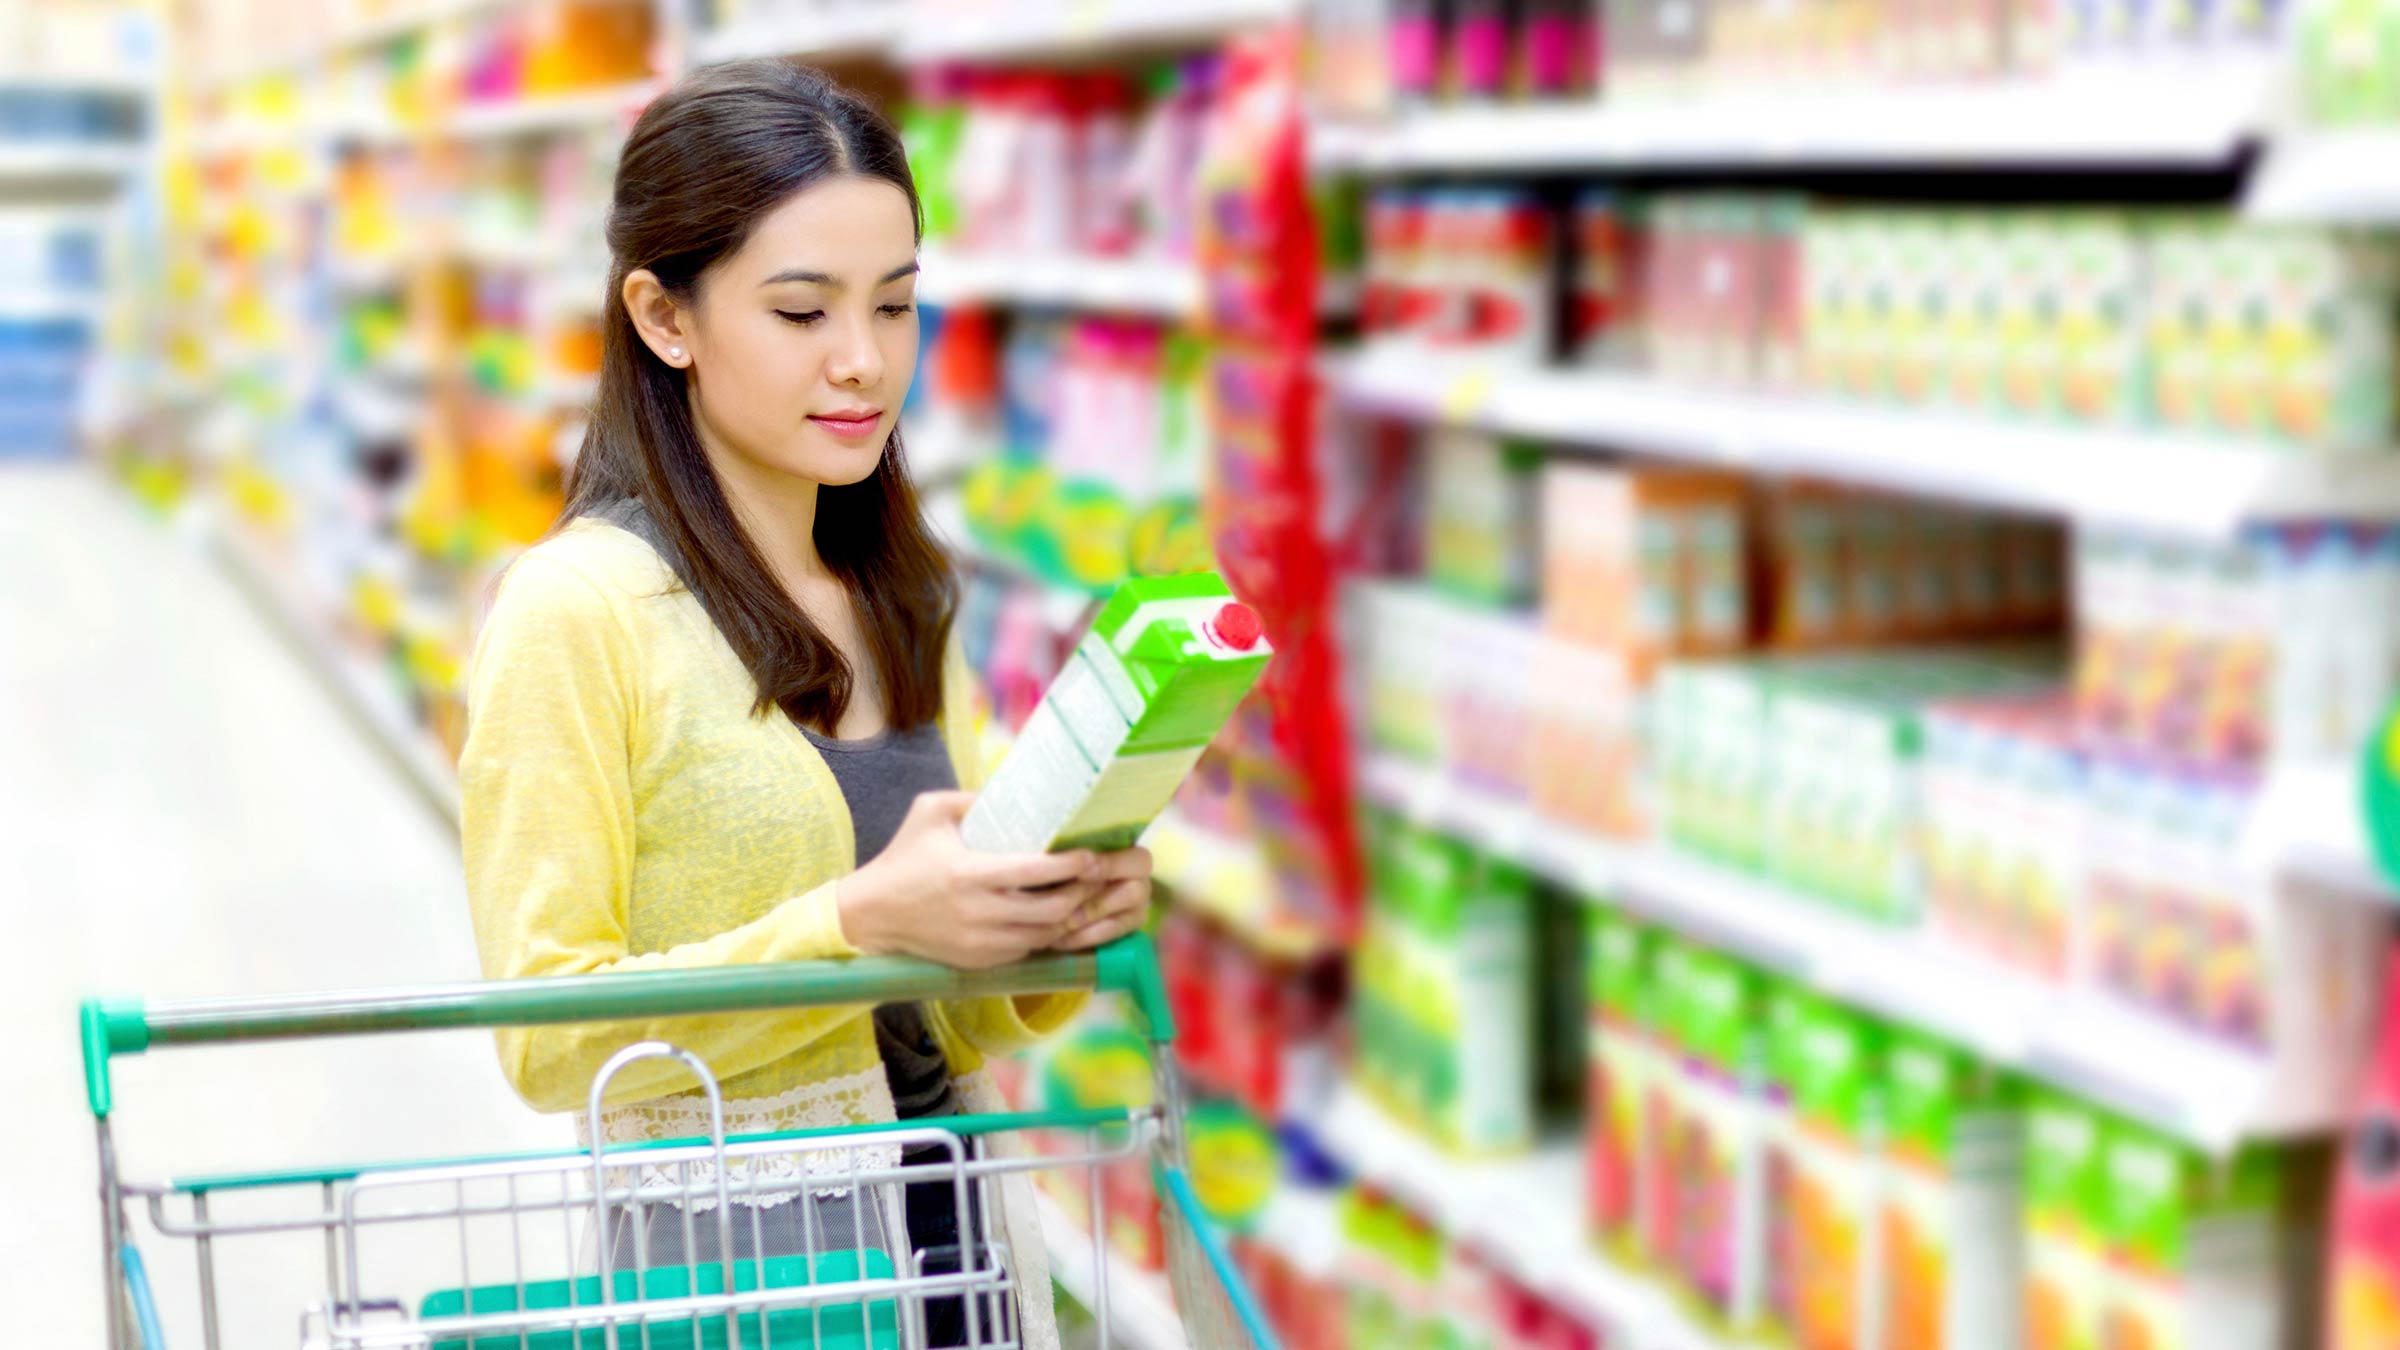 What you should know about food additives when eating processed foods